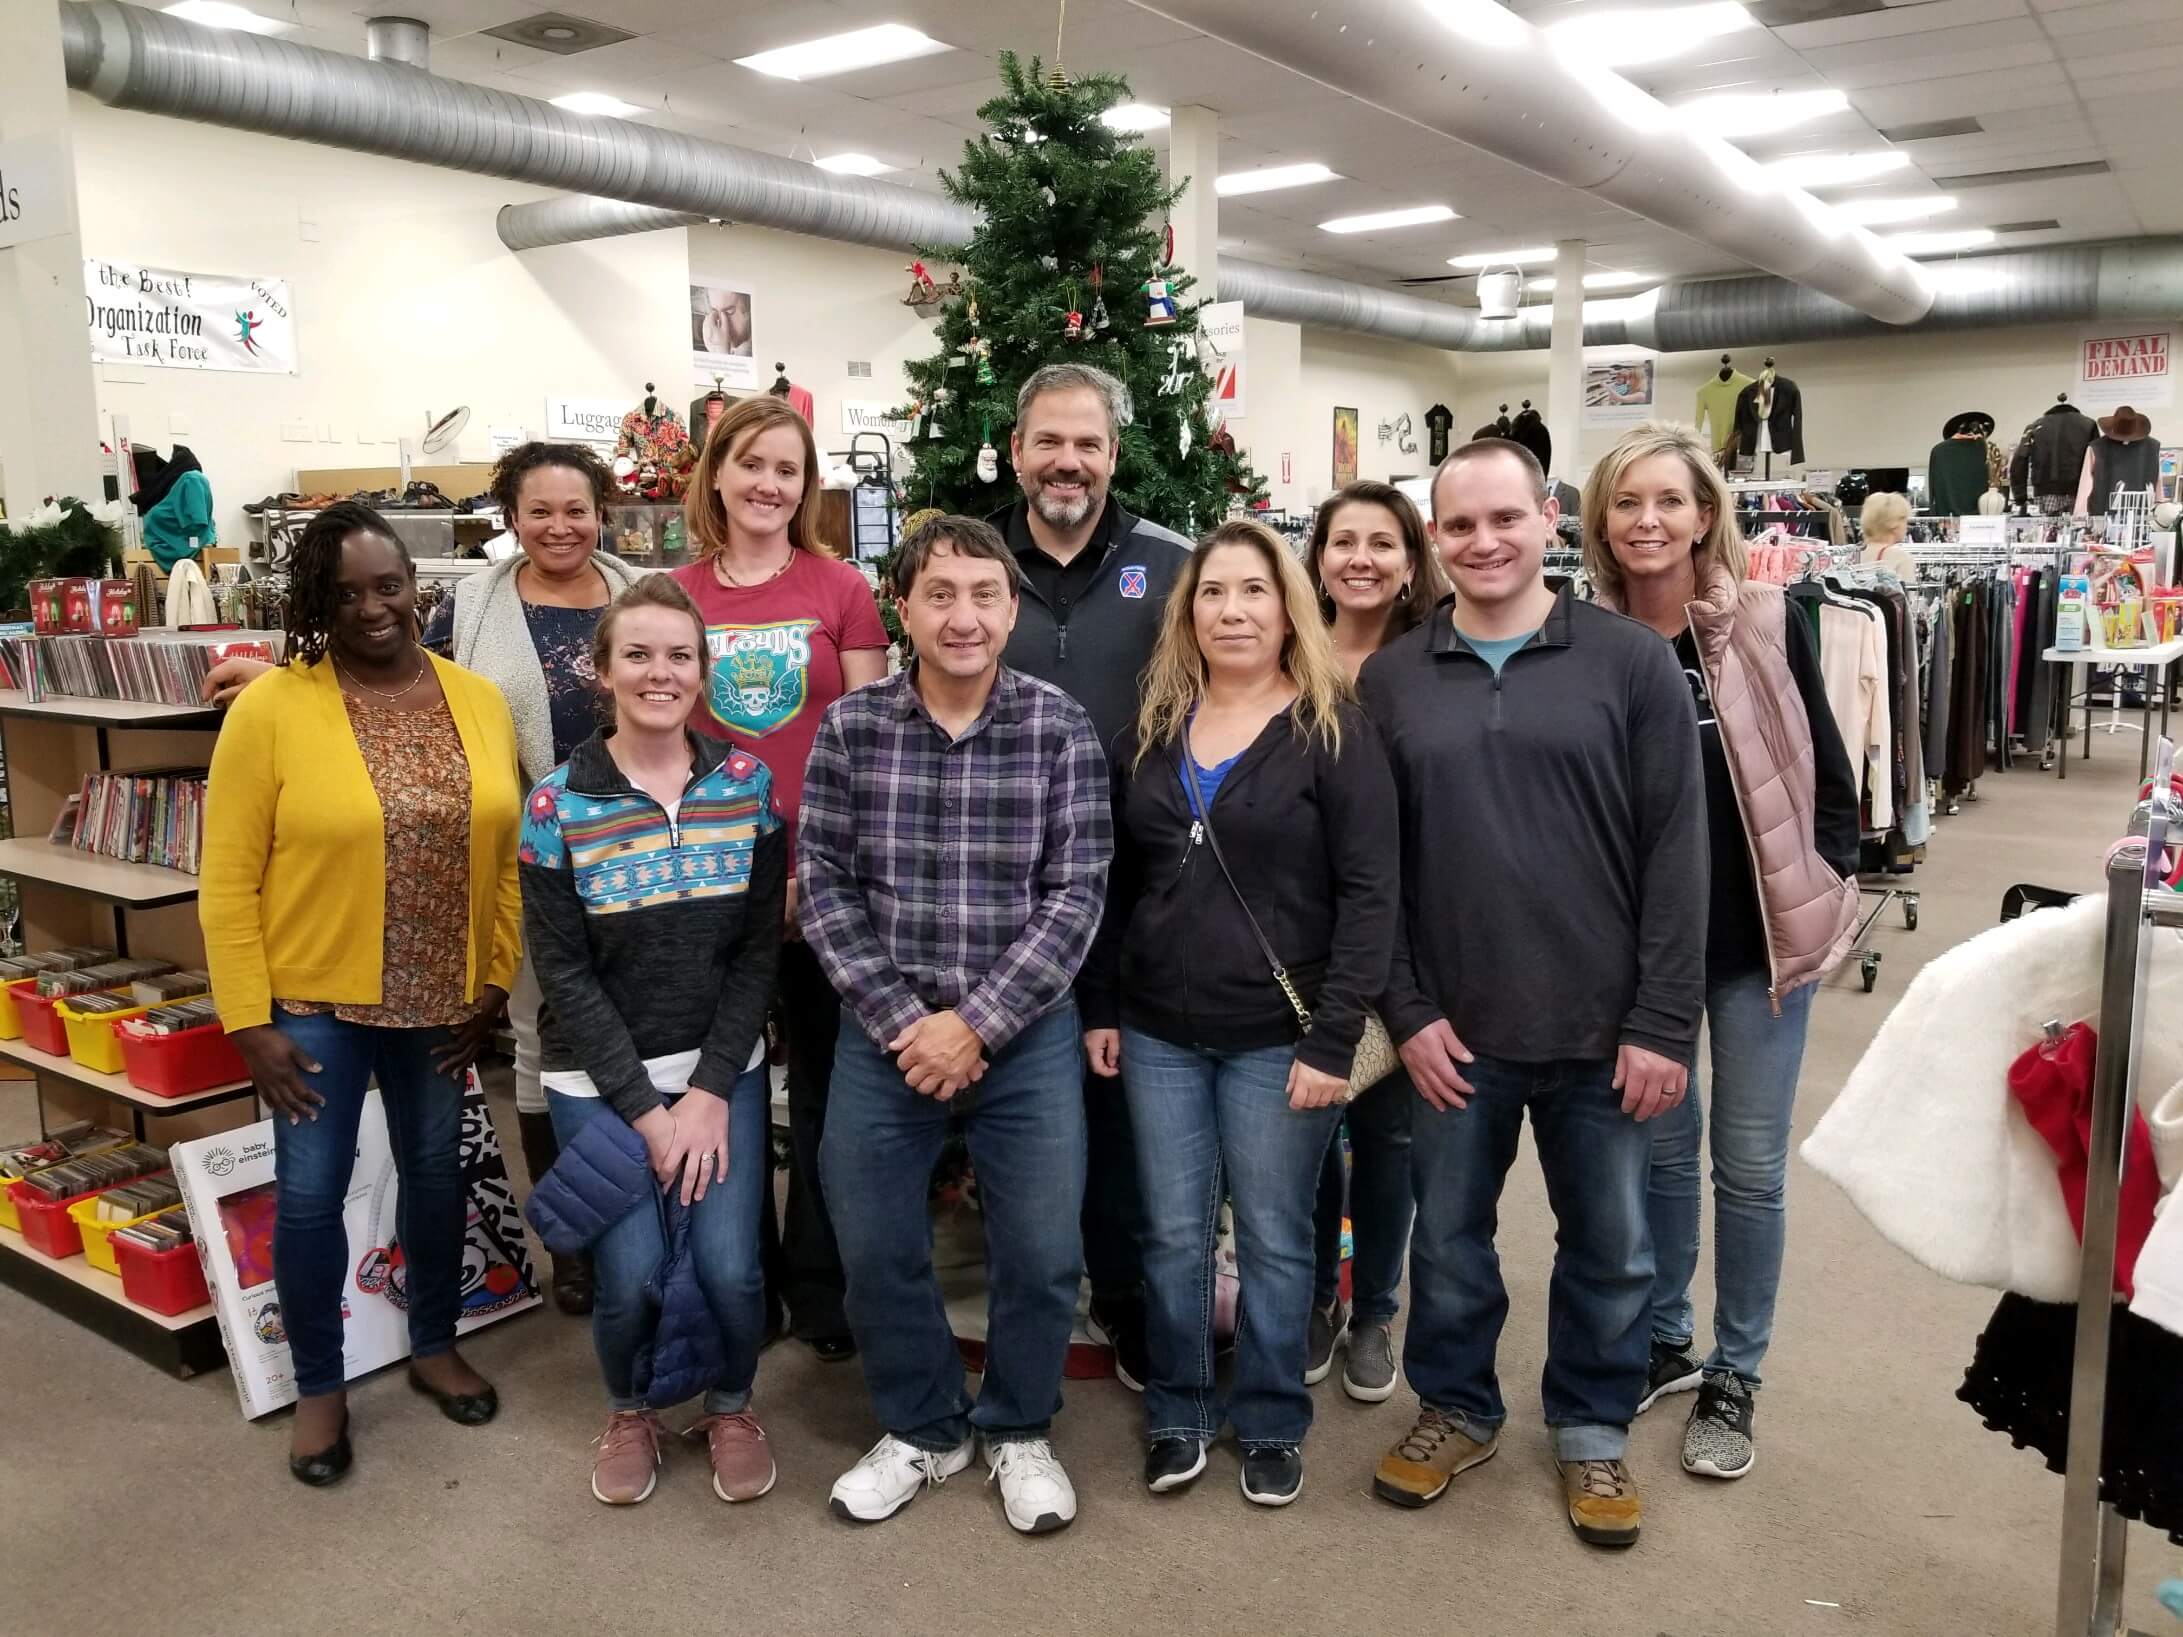 Each November our corporate staff chooses a local charity in the Denver region and participates in a work day dedicated to giving back to the community.